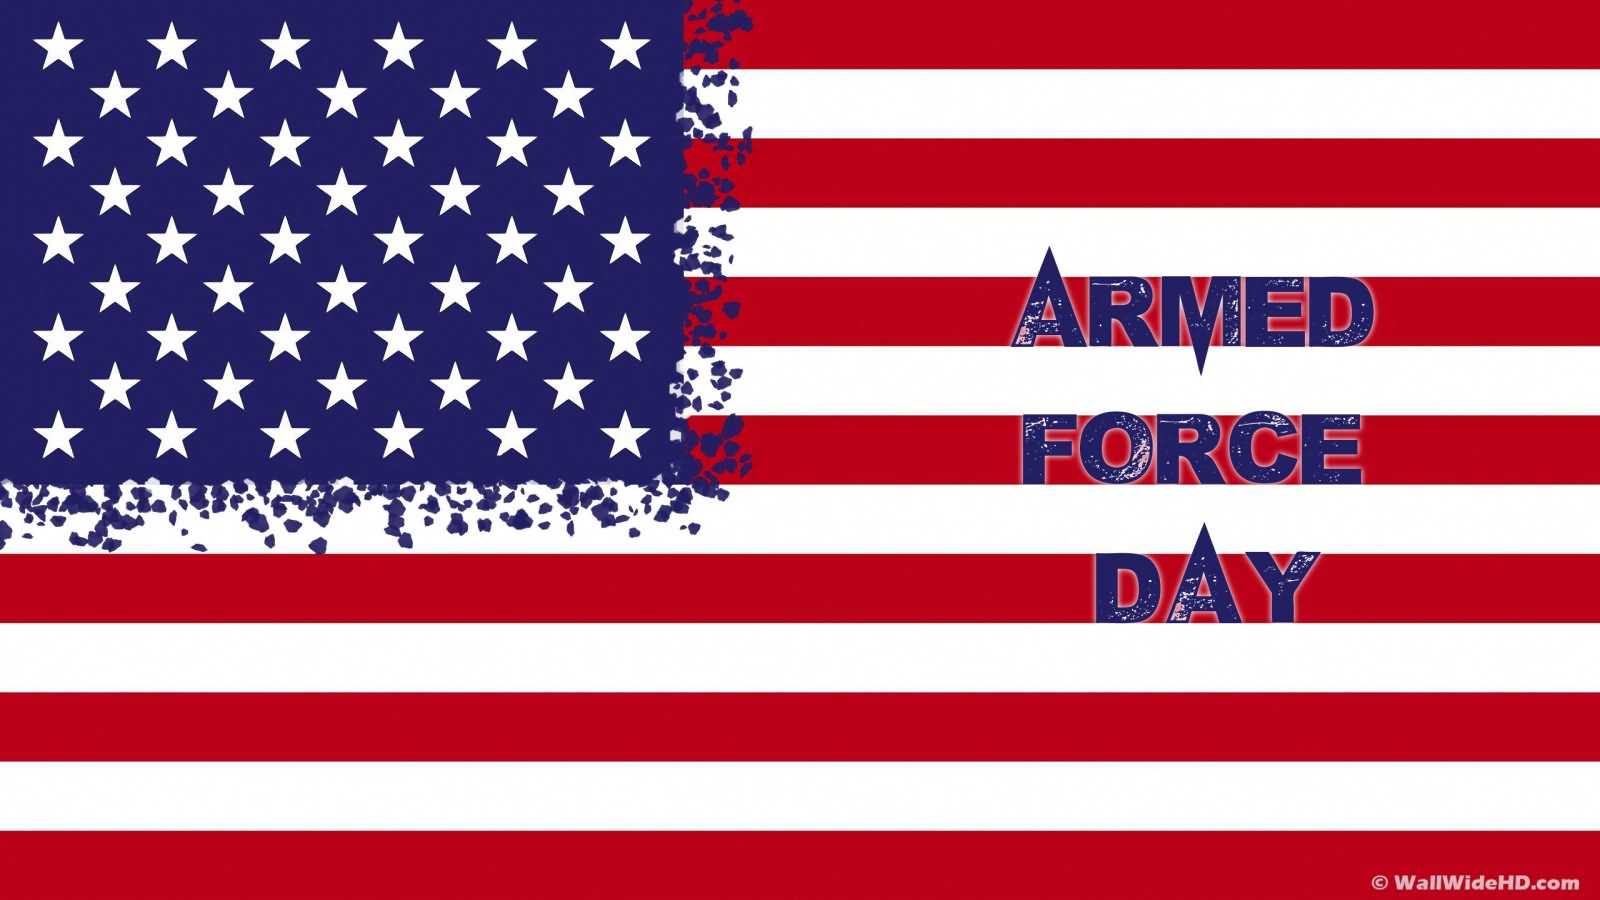 Happy Armed Forces Day America Wishes